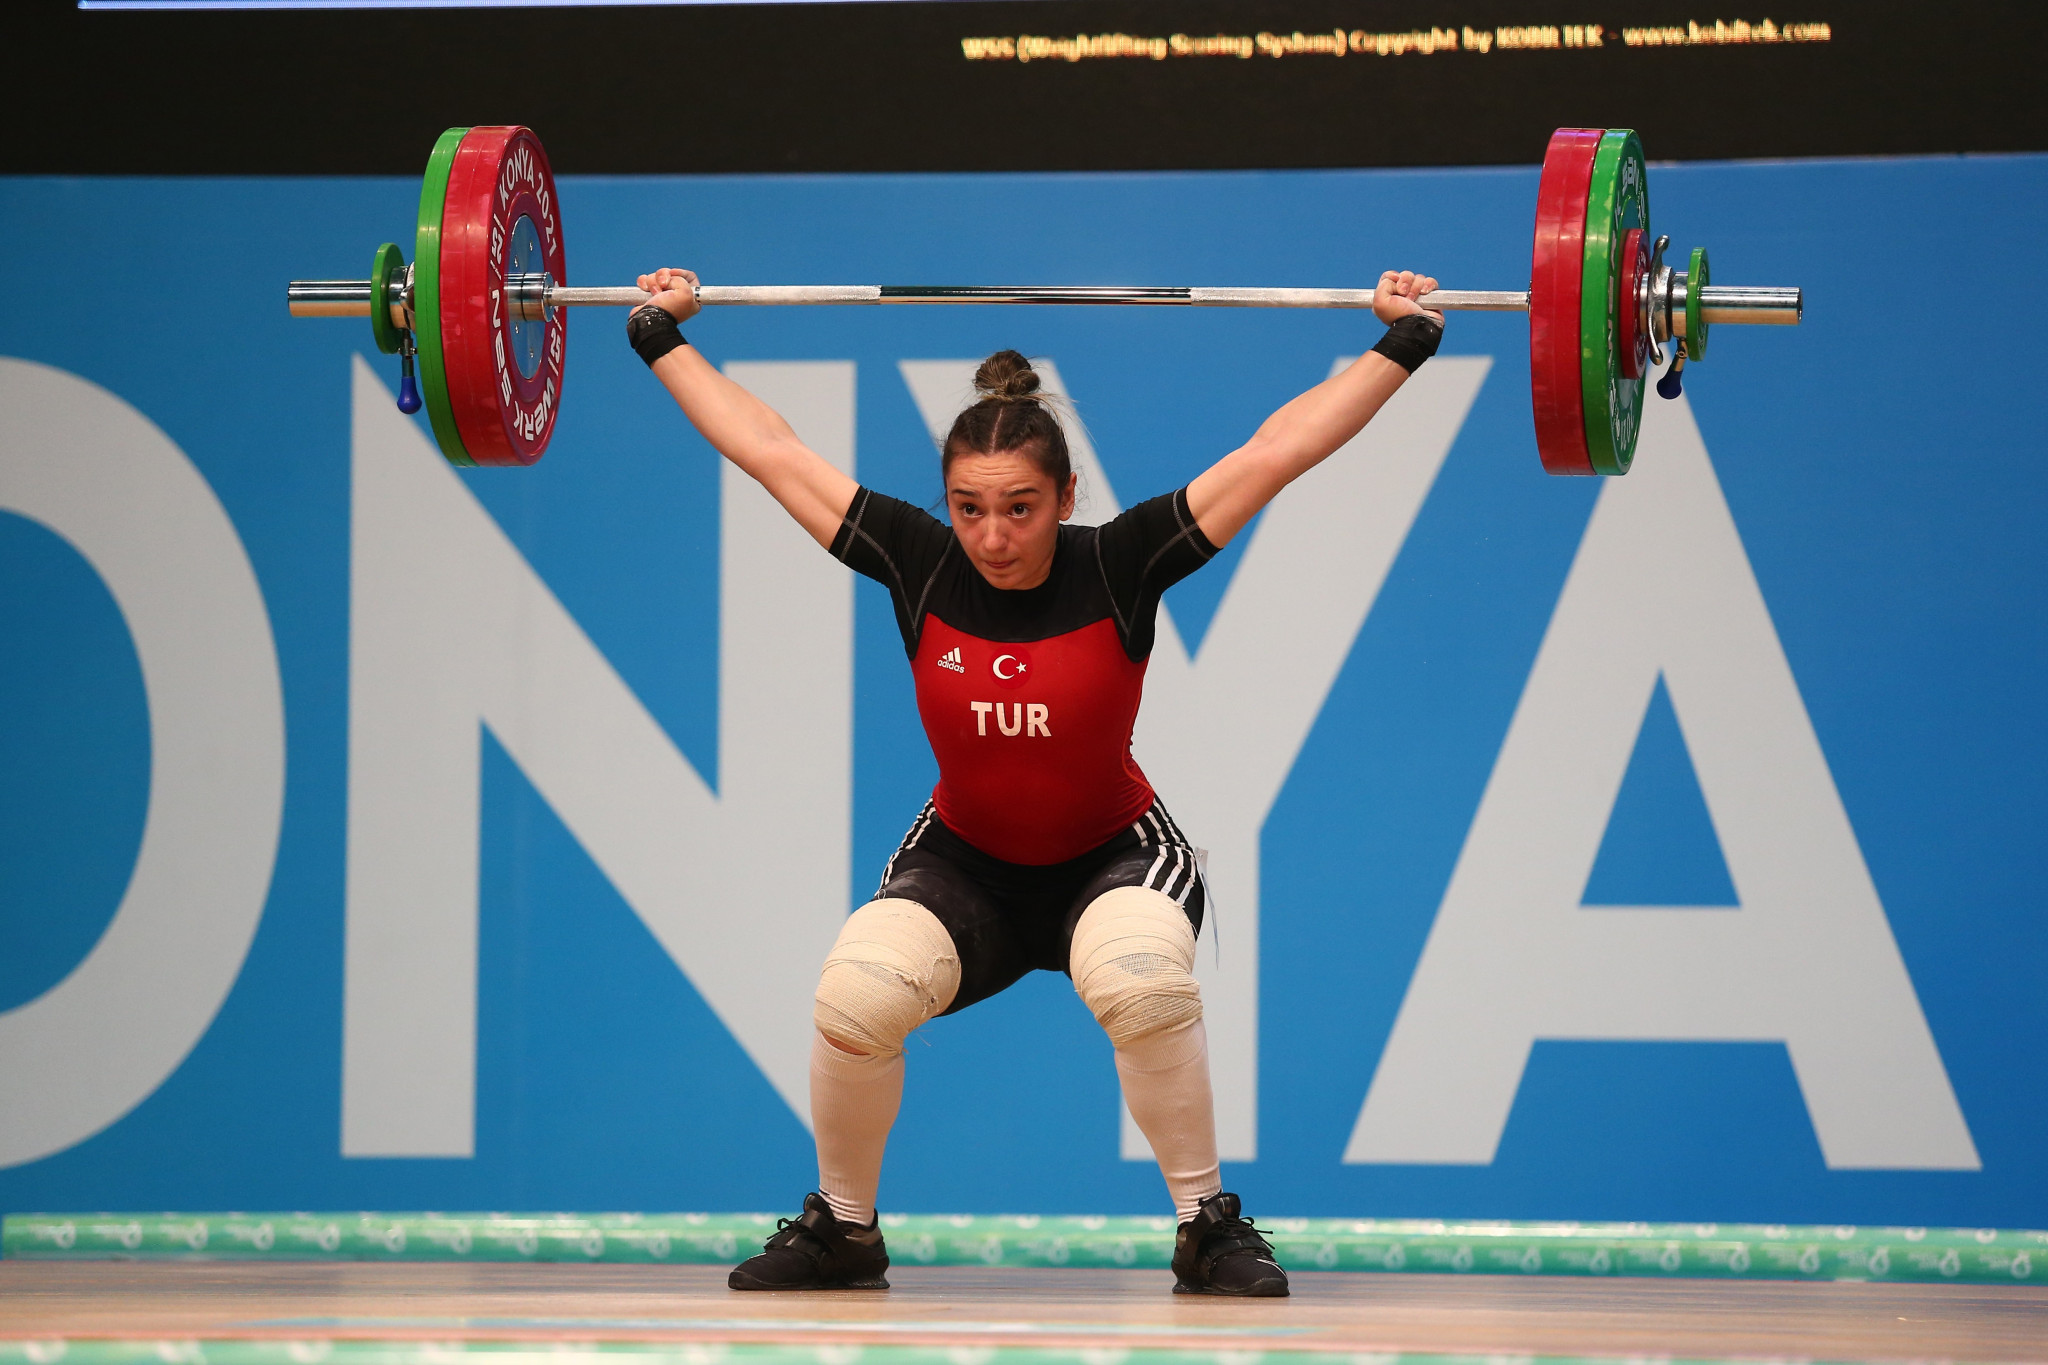 Nuray Gungor won the clean and jerk and women's 64kg category overall gold medals ©Konya 2021